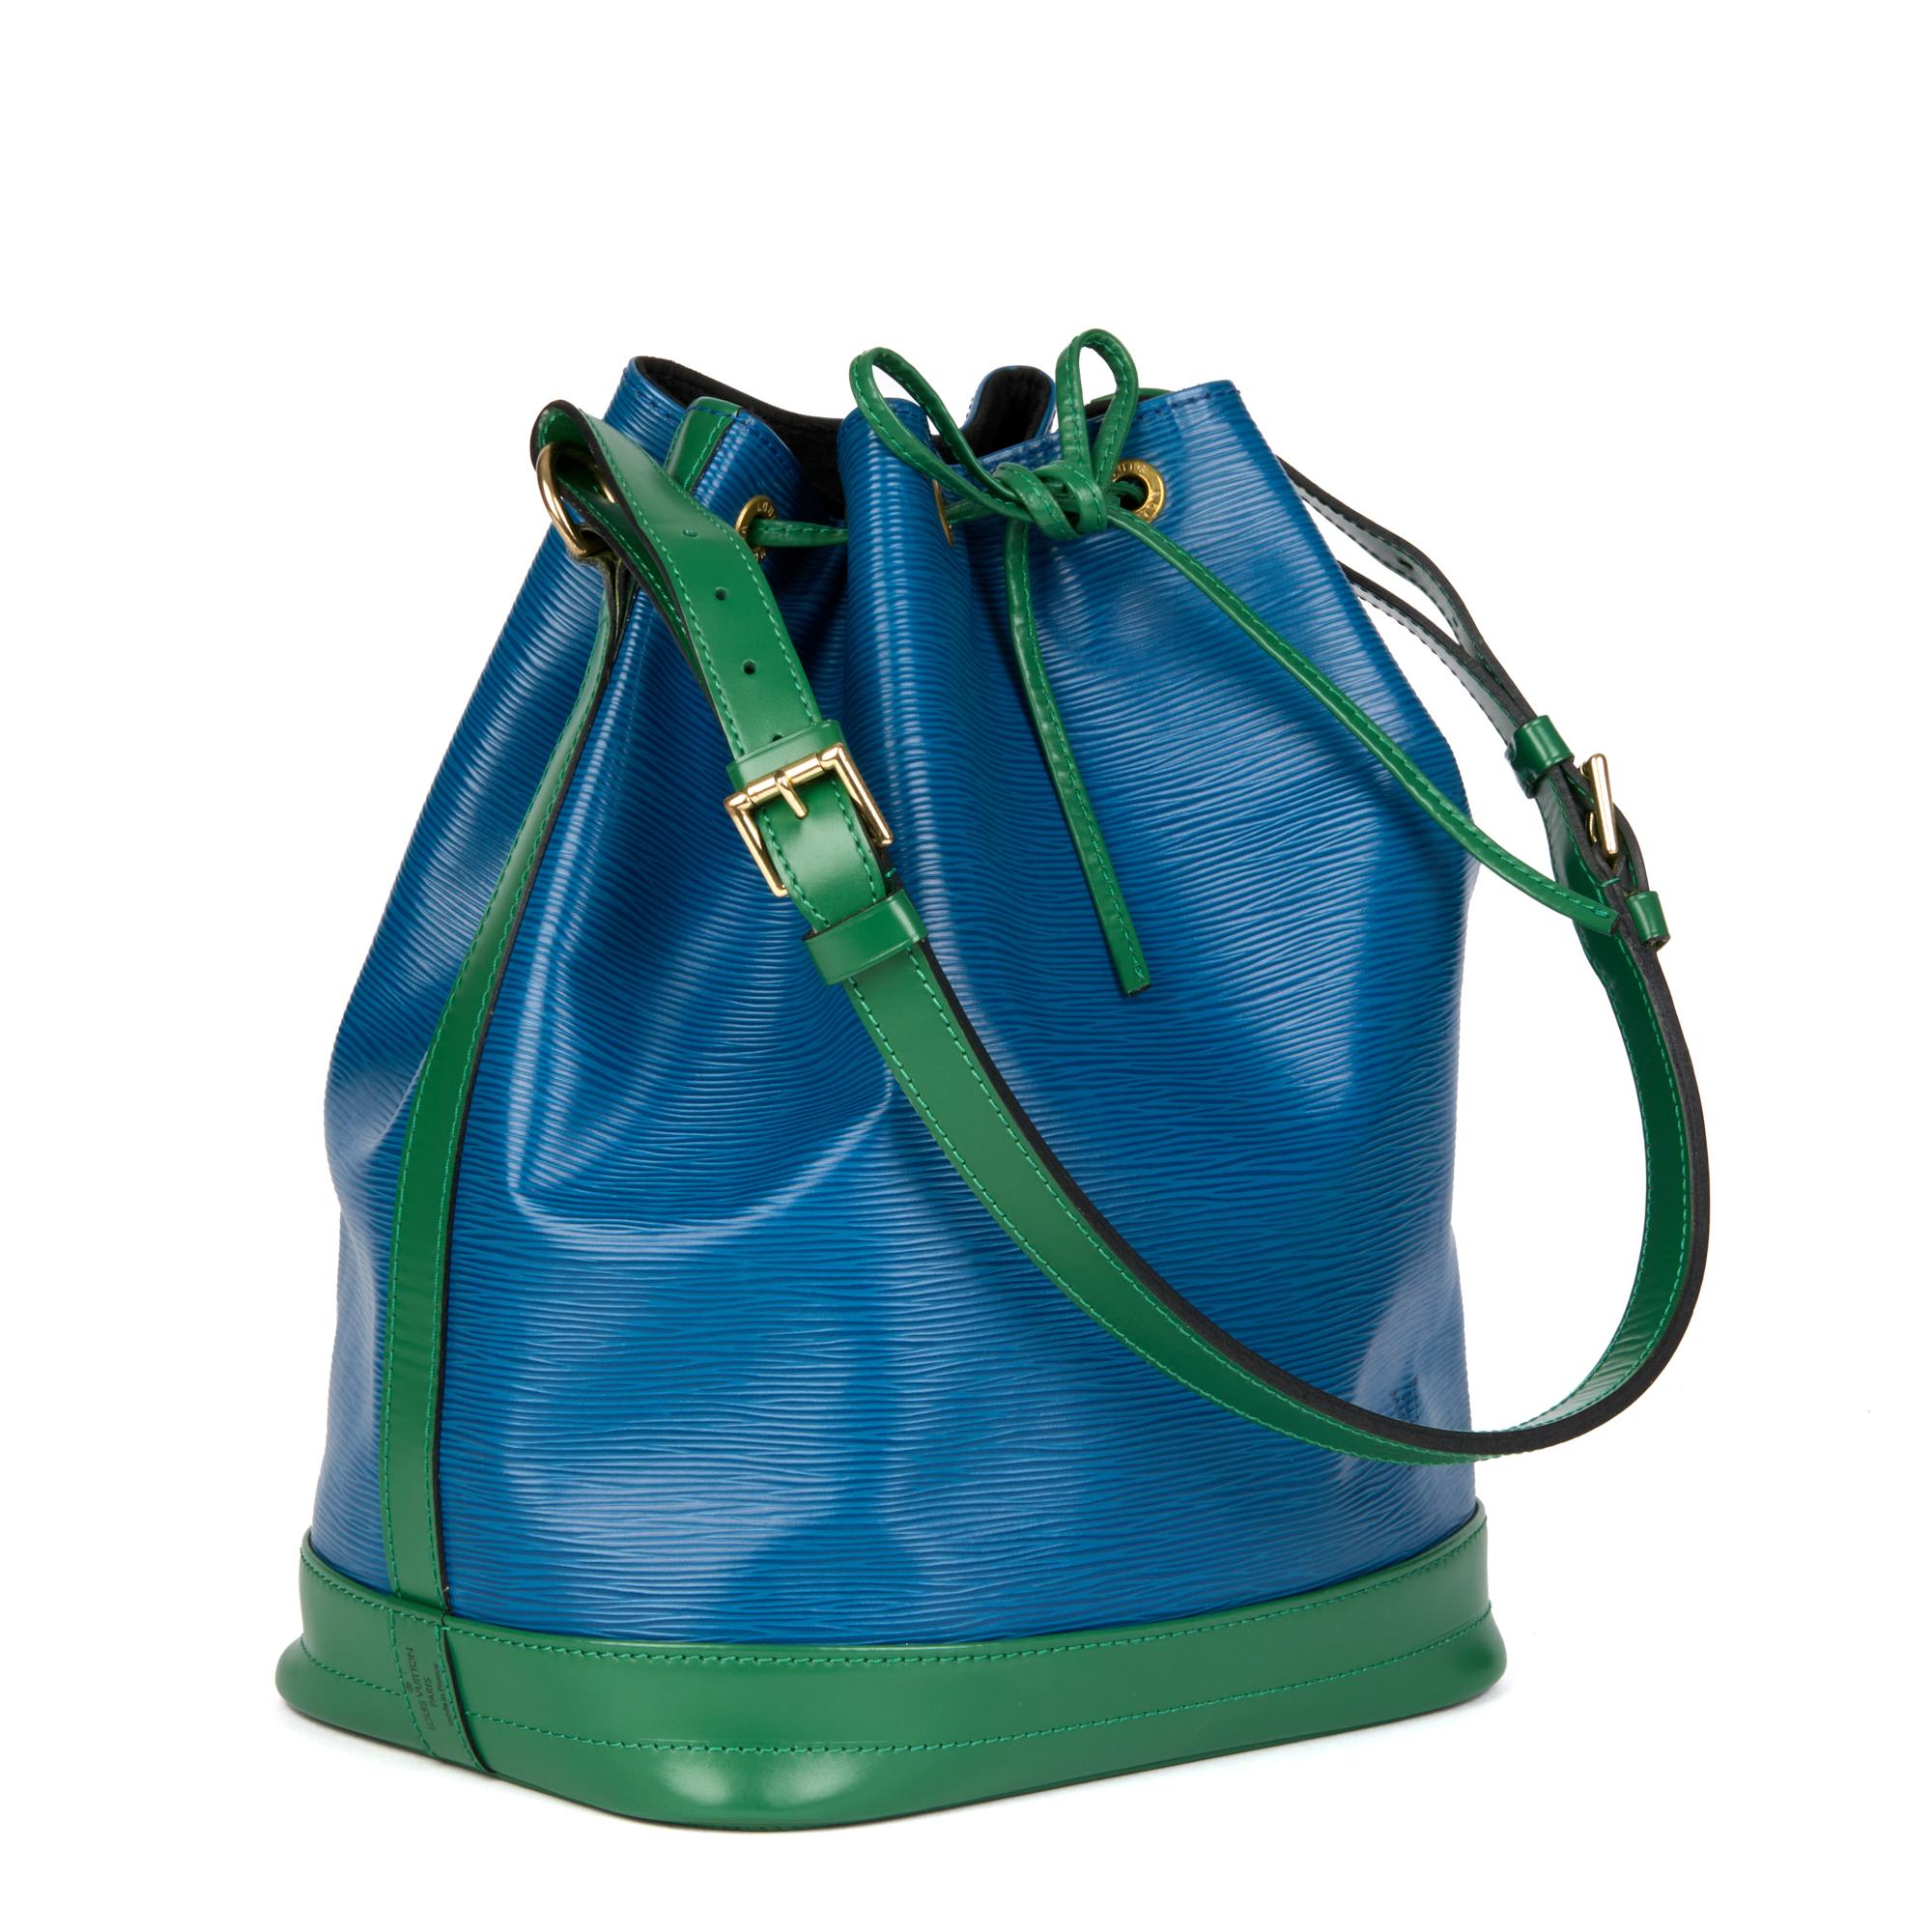 LOUIS VUITTON
Green & Blue Epi Leather Vintage Noé

Xupes Reference: HB4457
Serial Number: VI 0963
Age (Circa): 1993
Authenticity Details: Date Stamp (Made in France) 
Gender: Ladies
Type: Shoulder

Colour: Green, Blue
Hardware: Golden